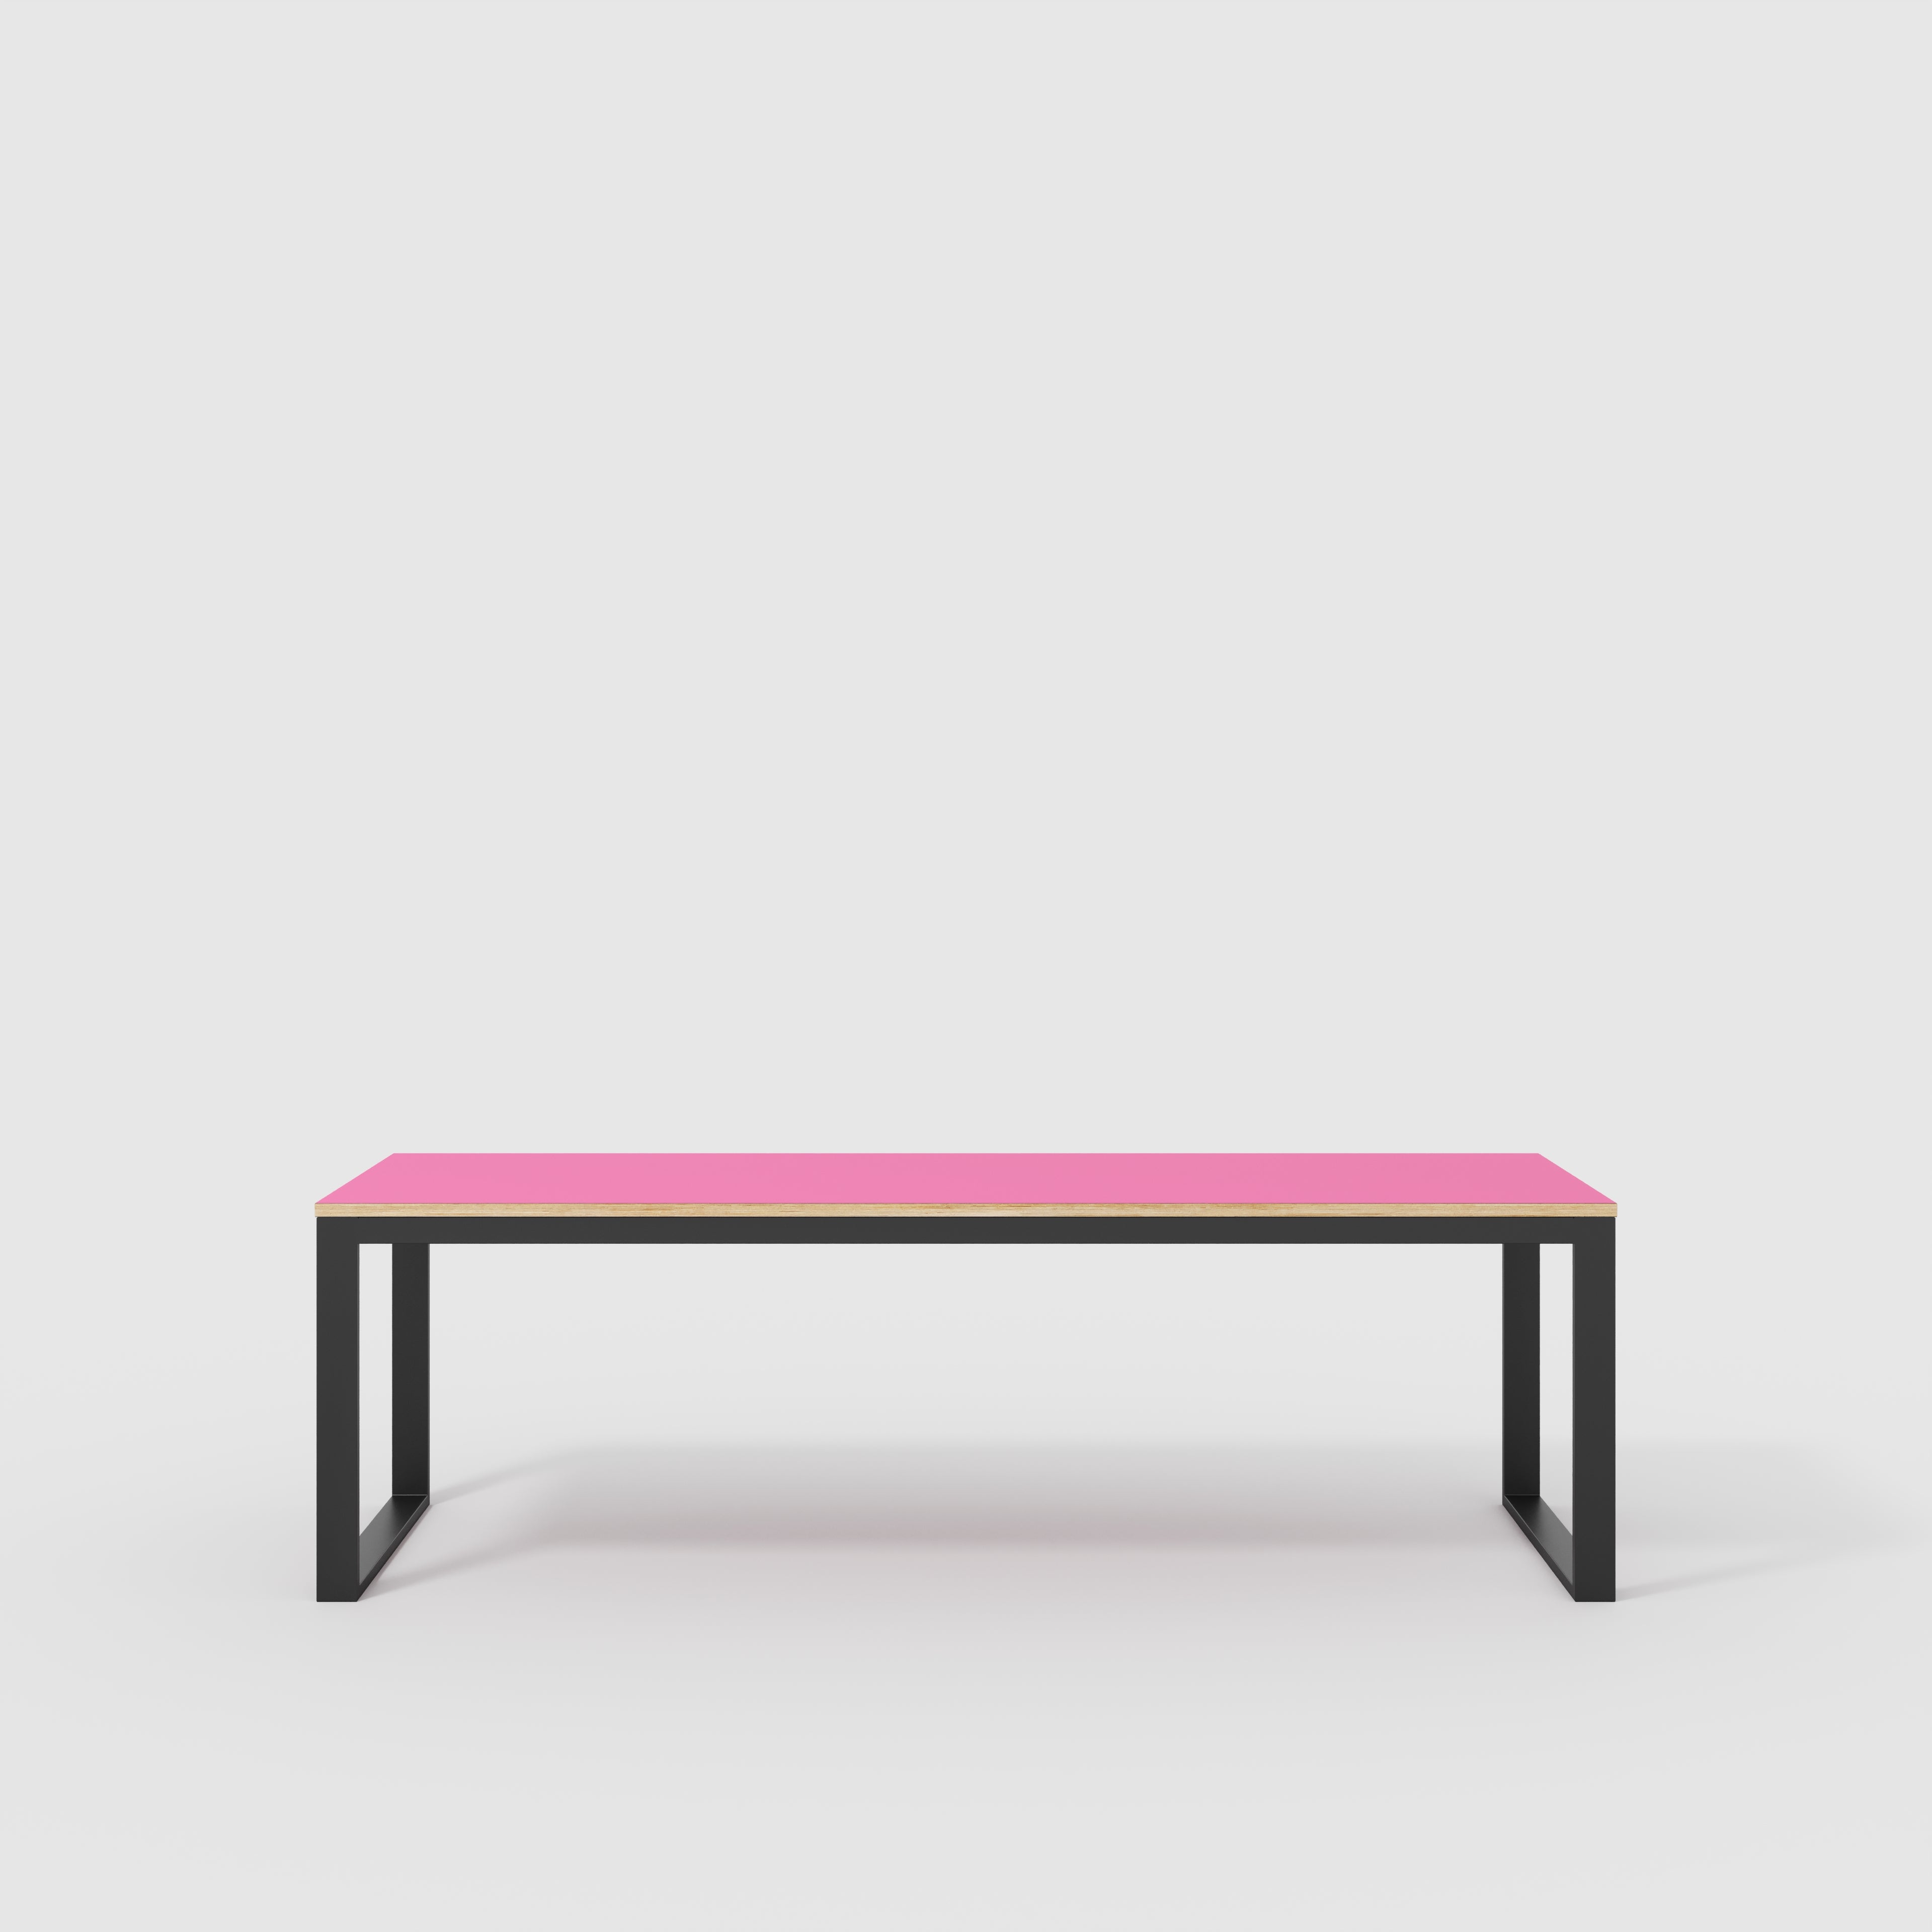 Table with Black Industrial Frame - Formica Juicy Pink - 2400(w) x 745(d) x 735(h)